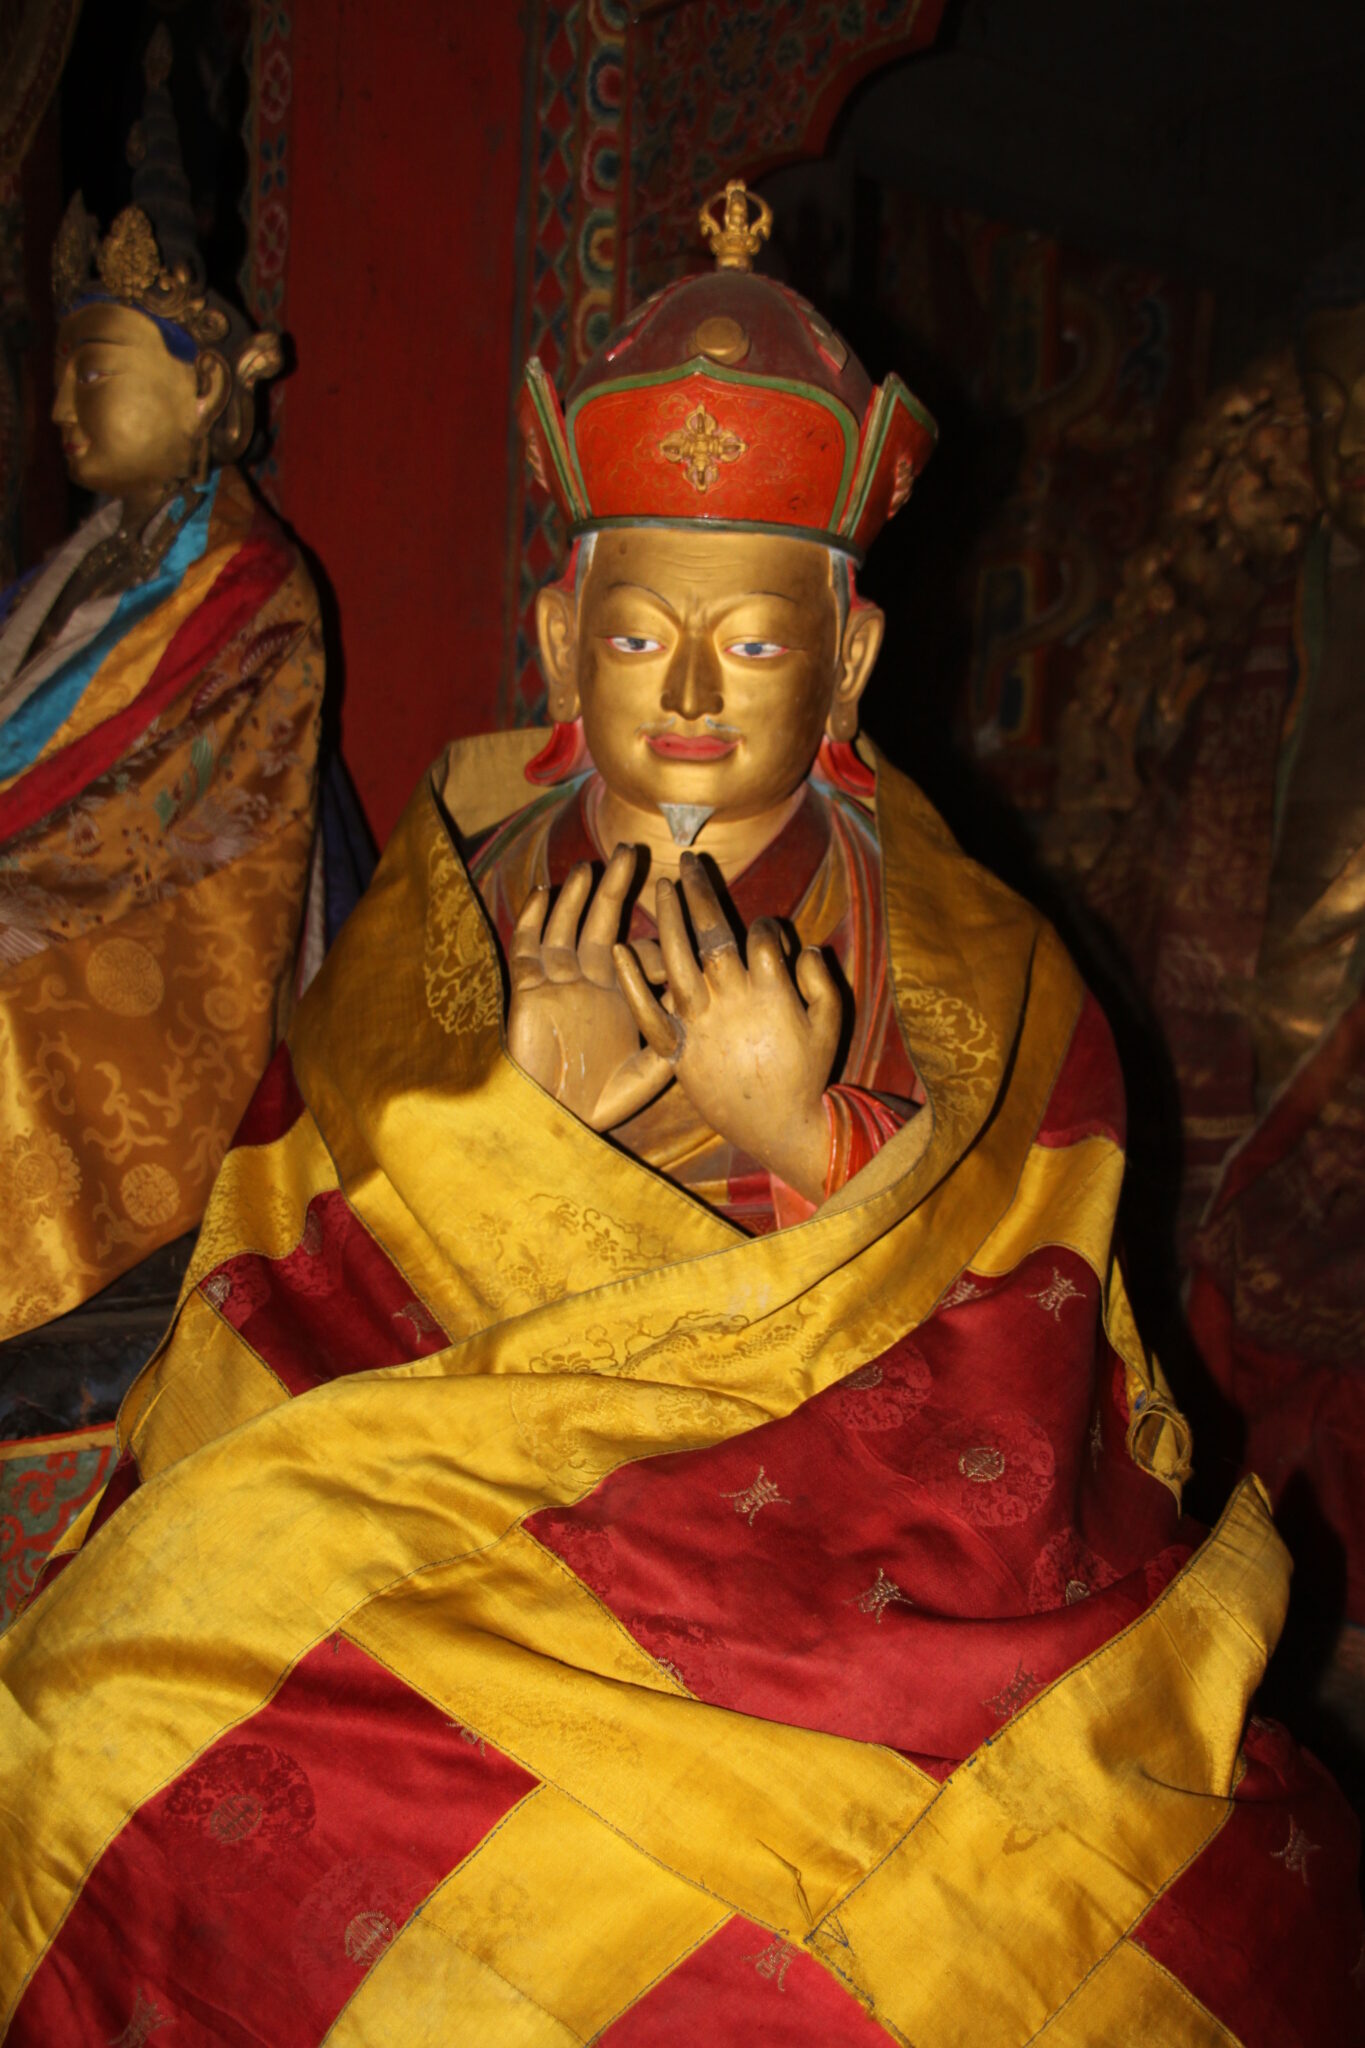 Golden statue of seated man wearing red hat with hands raised at chest; saffron and red textile wrapped around shoulders